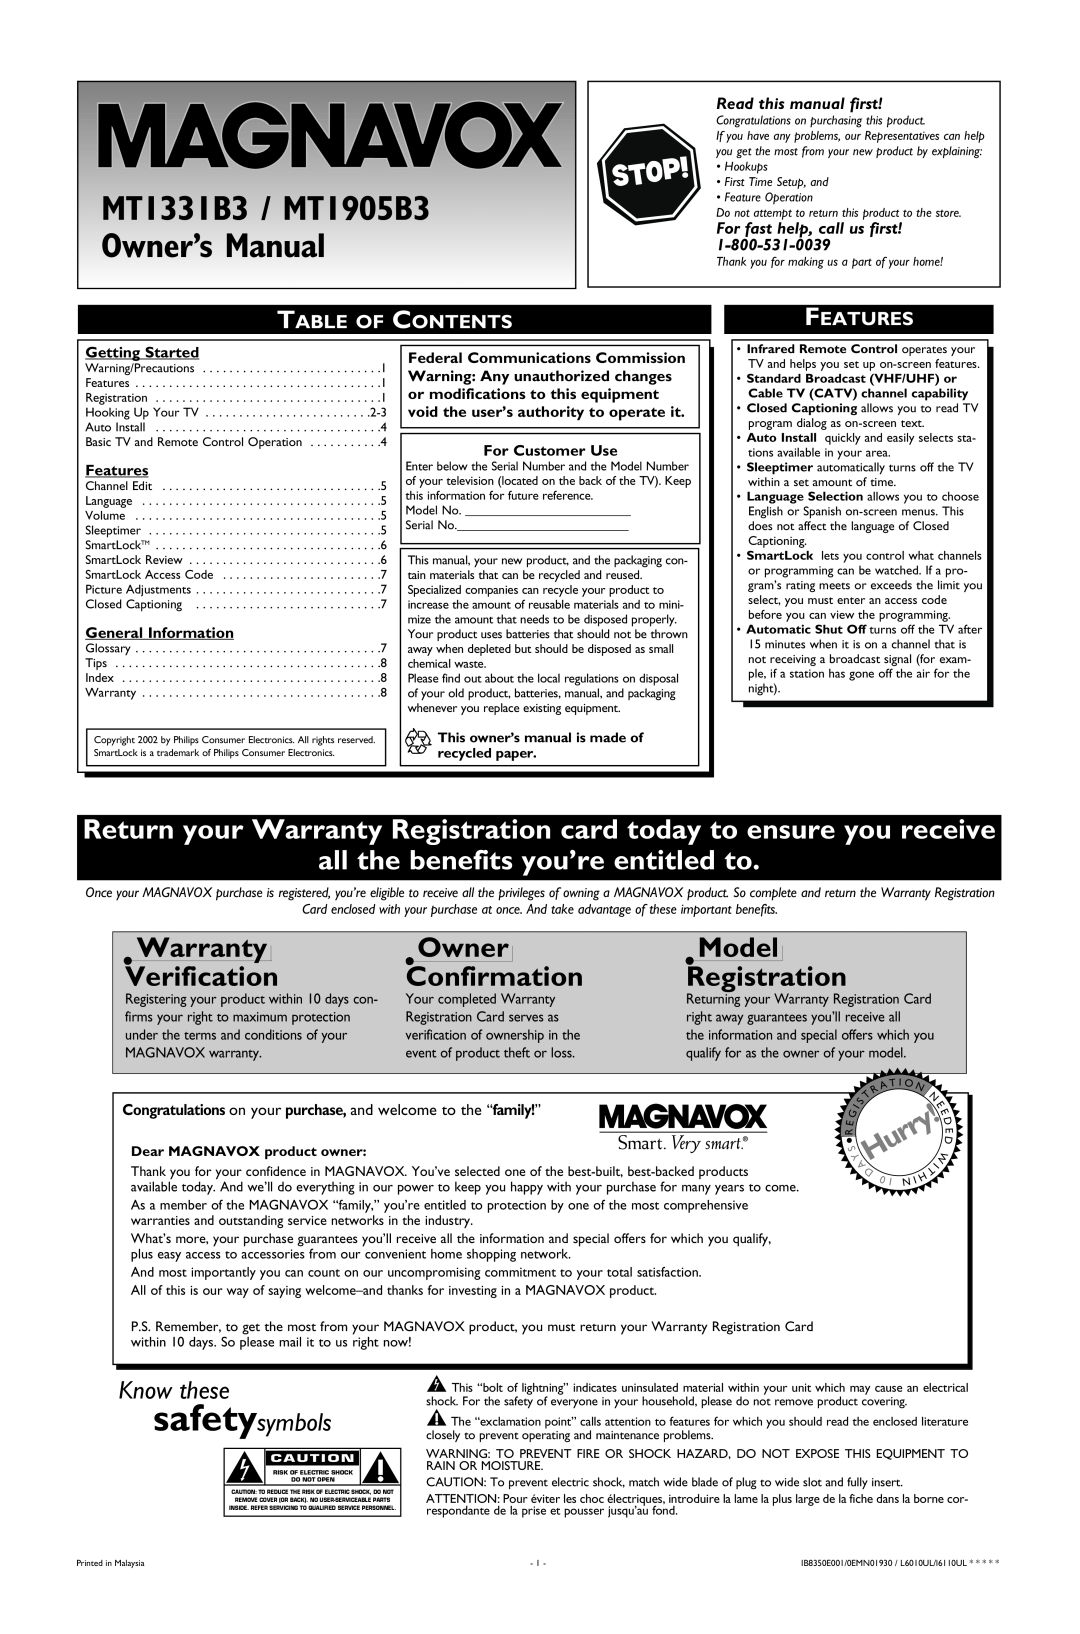 Magnavox MT1331B3 warranty Table Of Contents, Features, Getting Started, General Information, For Customer Use, Hurry 